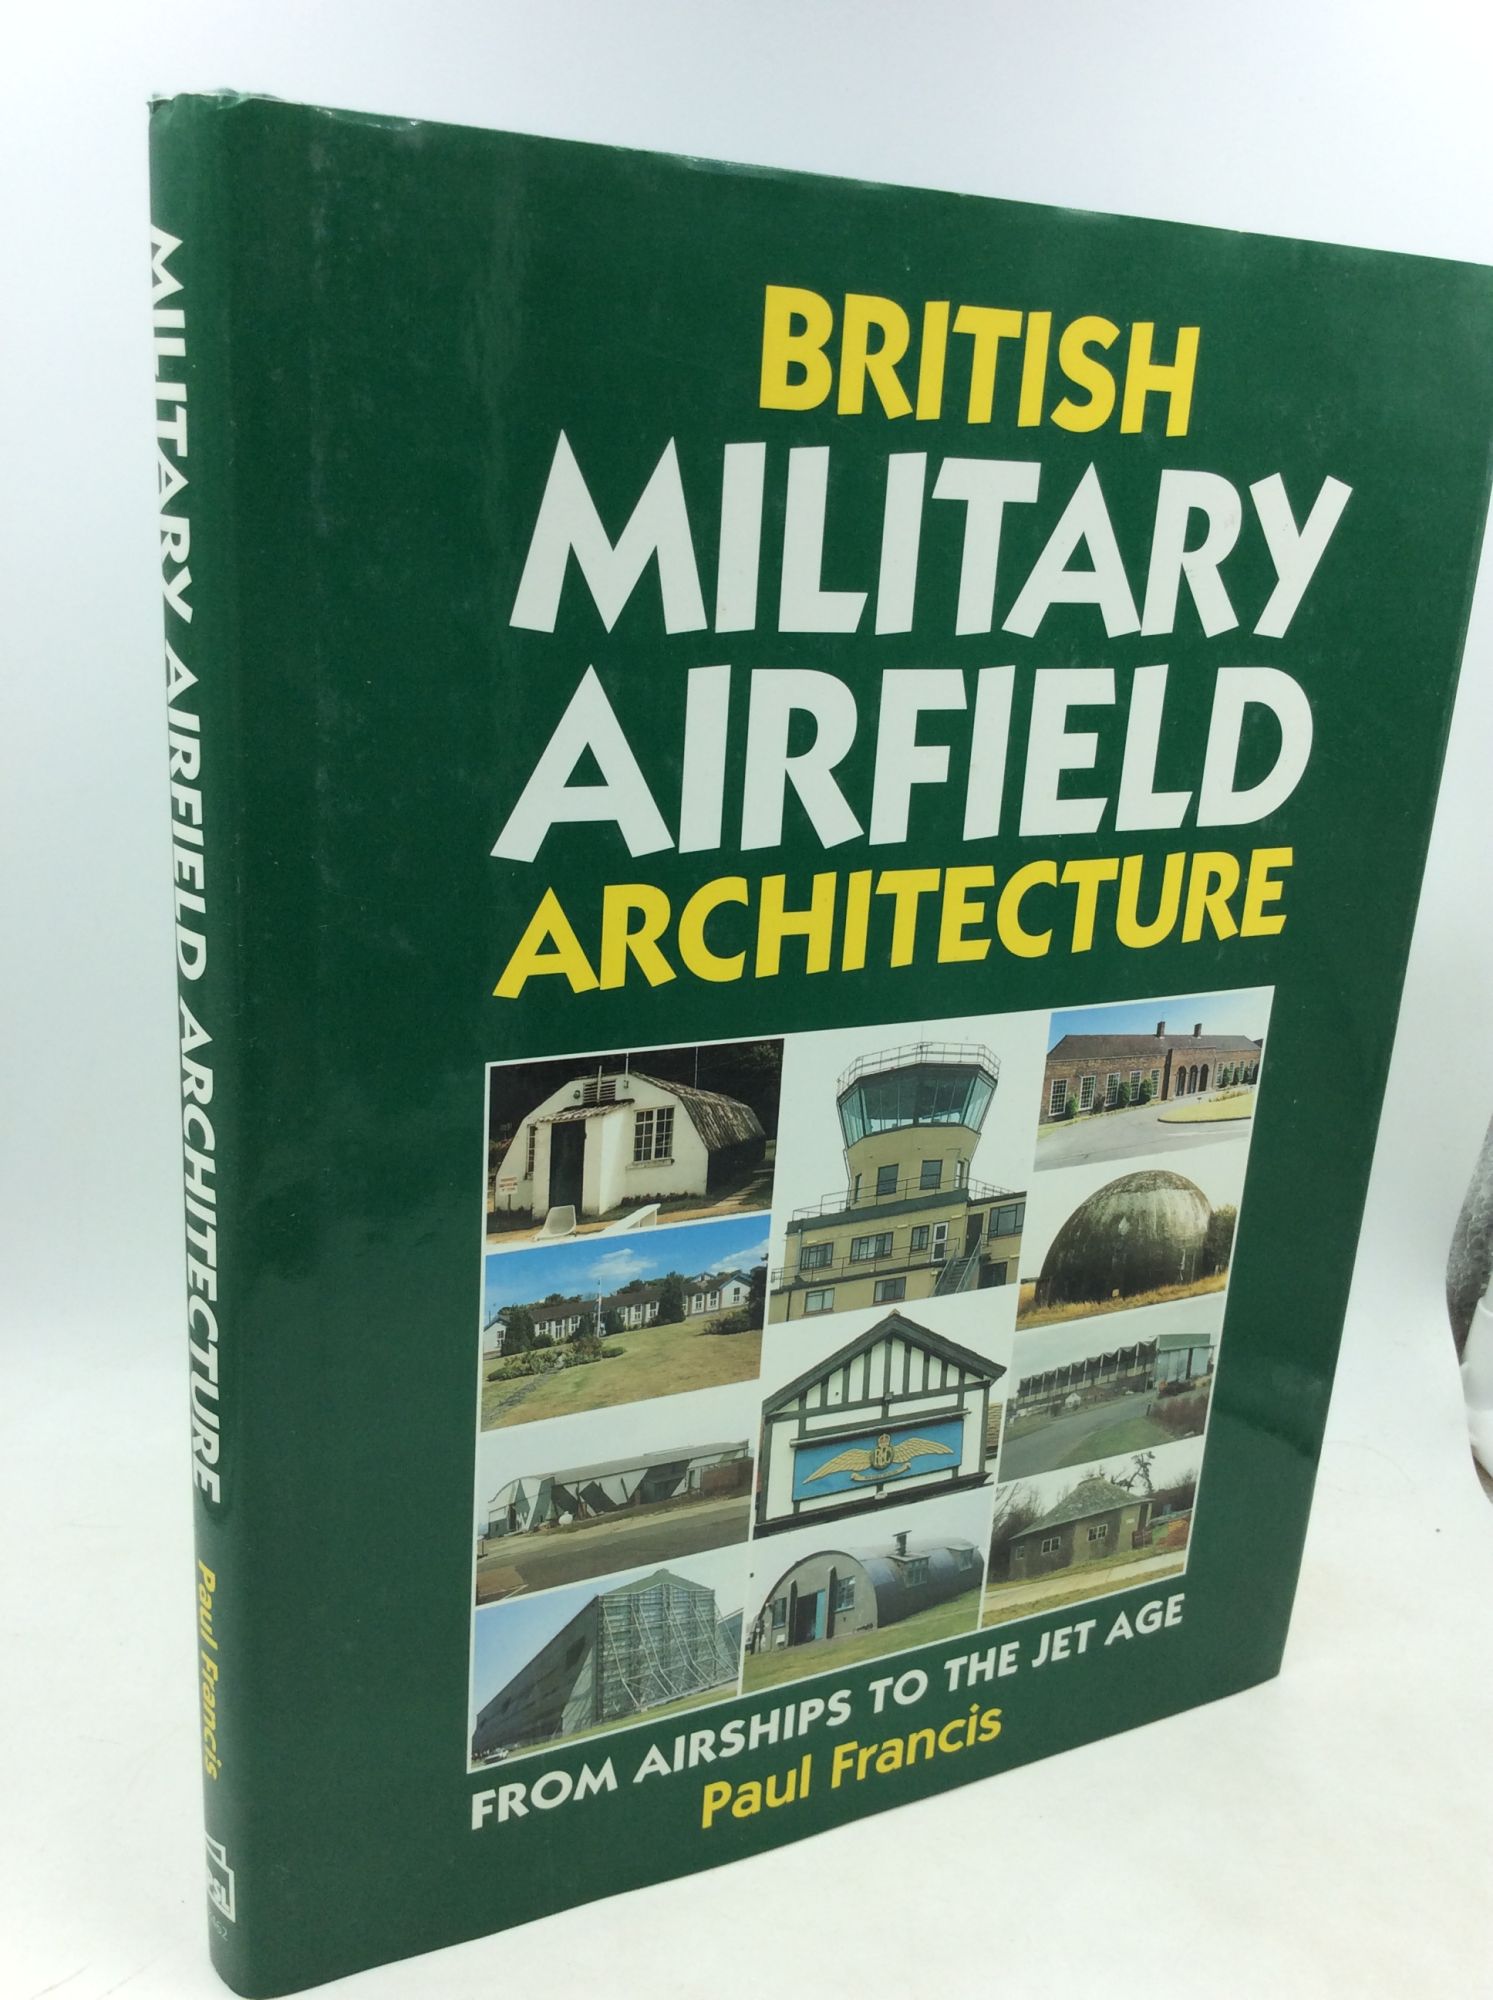 BRITISH MILITARY AIRFIELD ARCHITECTURE: From Airships to the Jet Age - Paul Francis